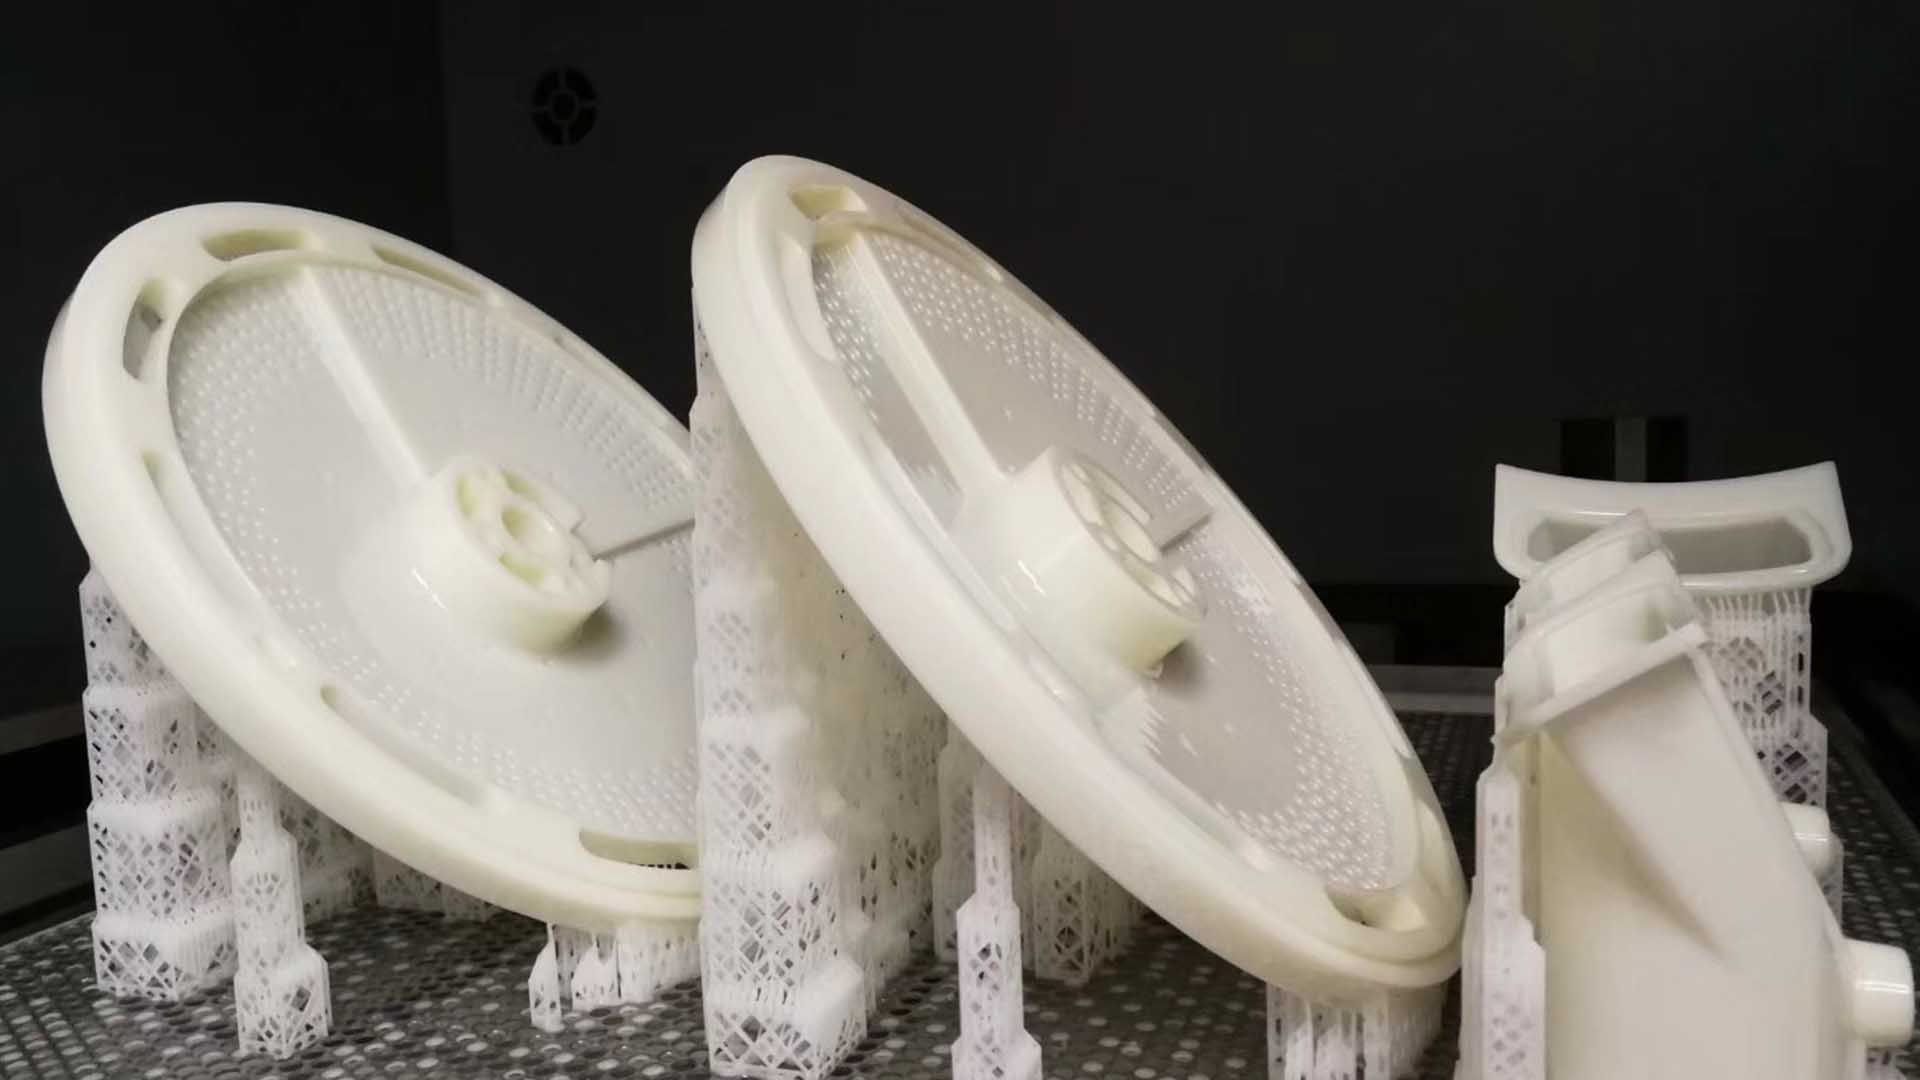 The miracle of future floor maintenance: a 3D printed floor waxing machine prototype model created by an industrial-grade 3D printer